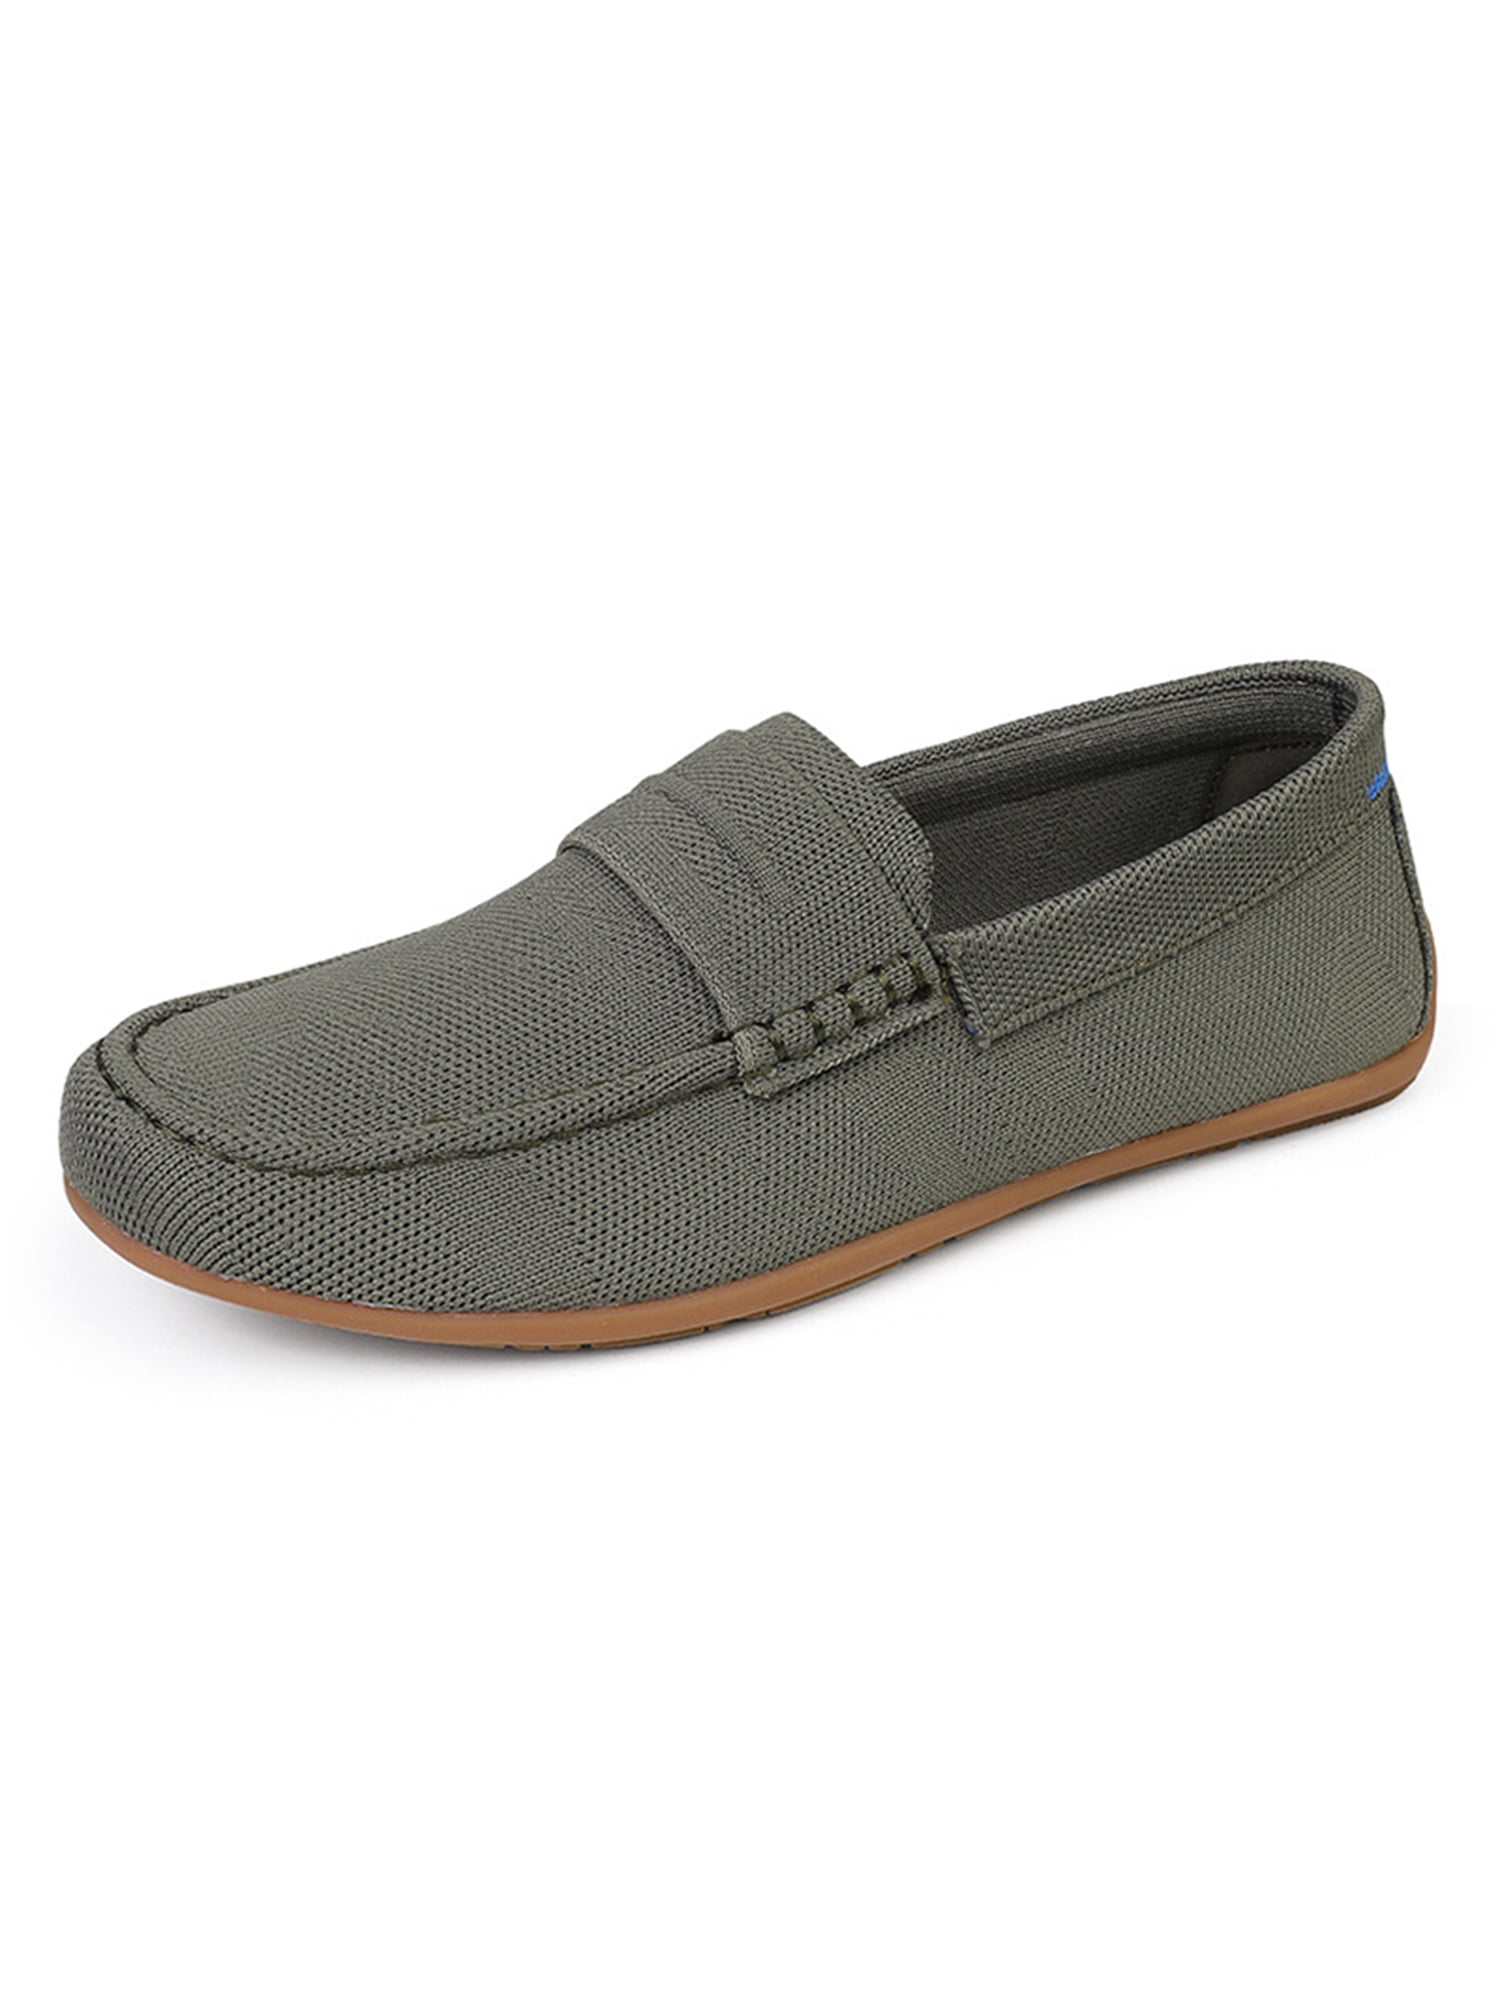 The Best Loafers For Men: Comfortable and Sustainable